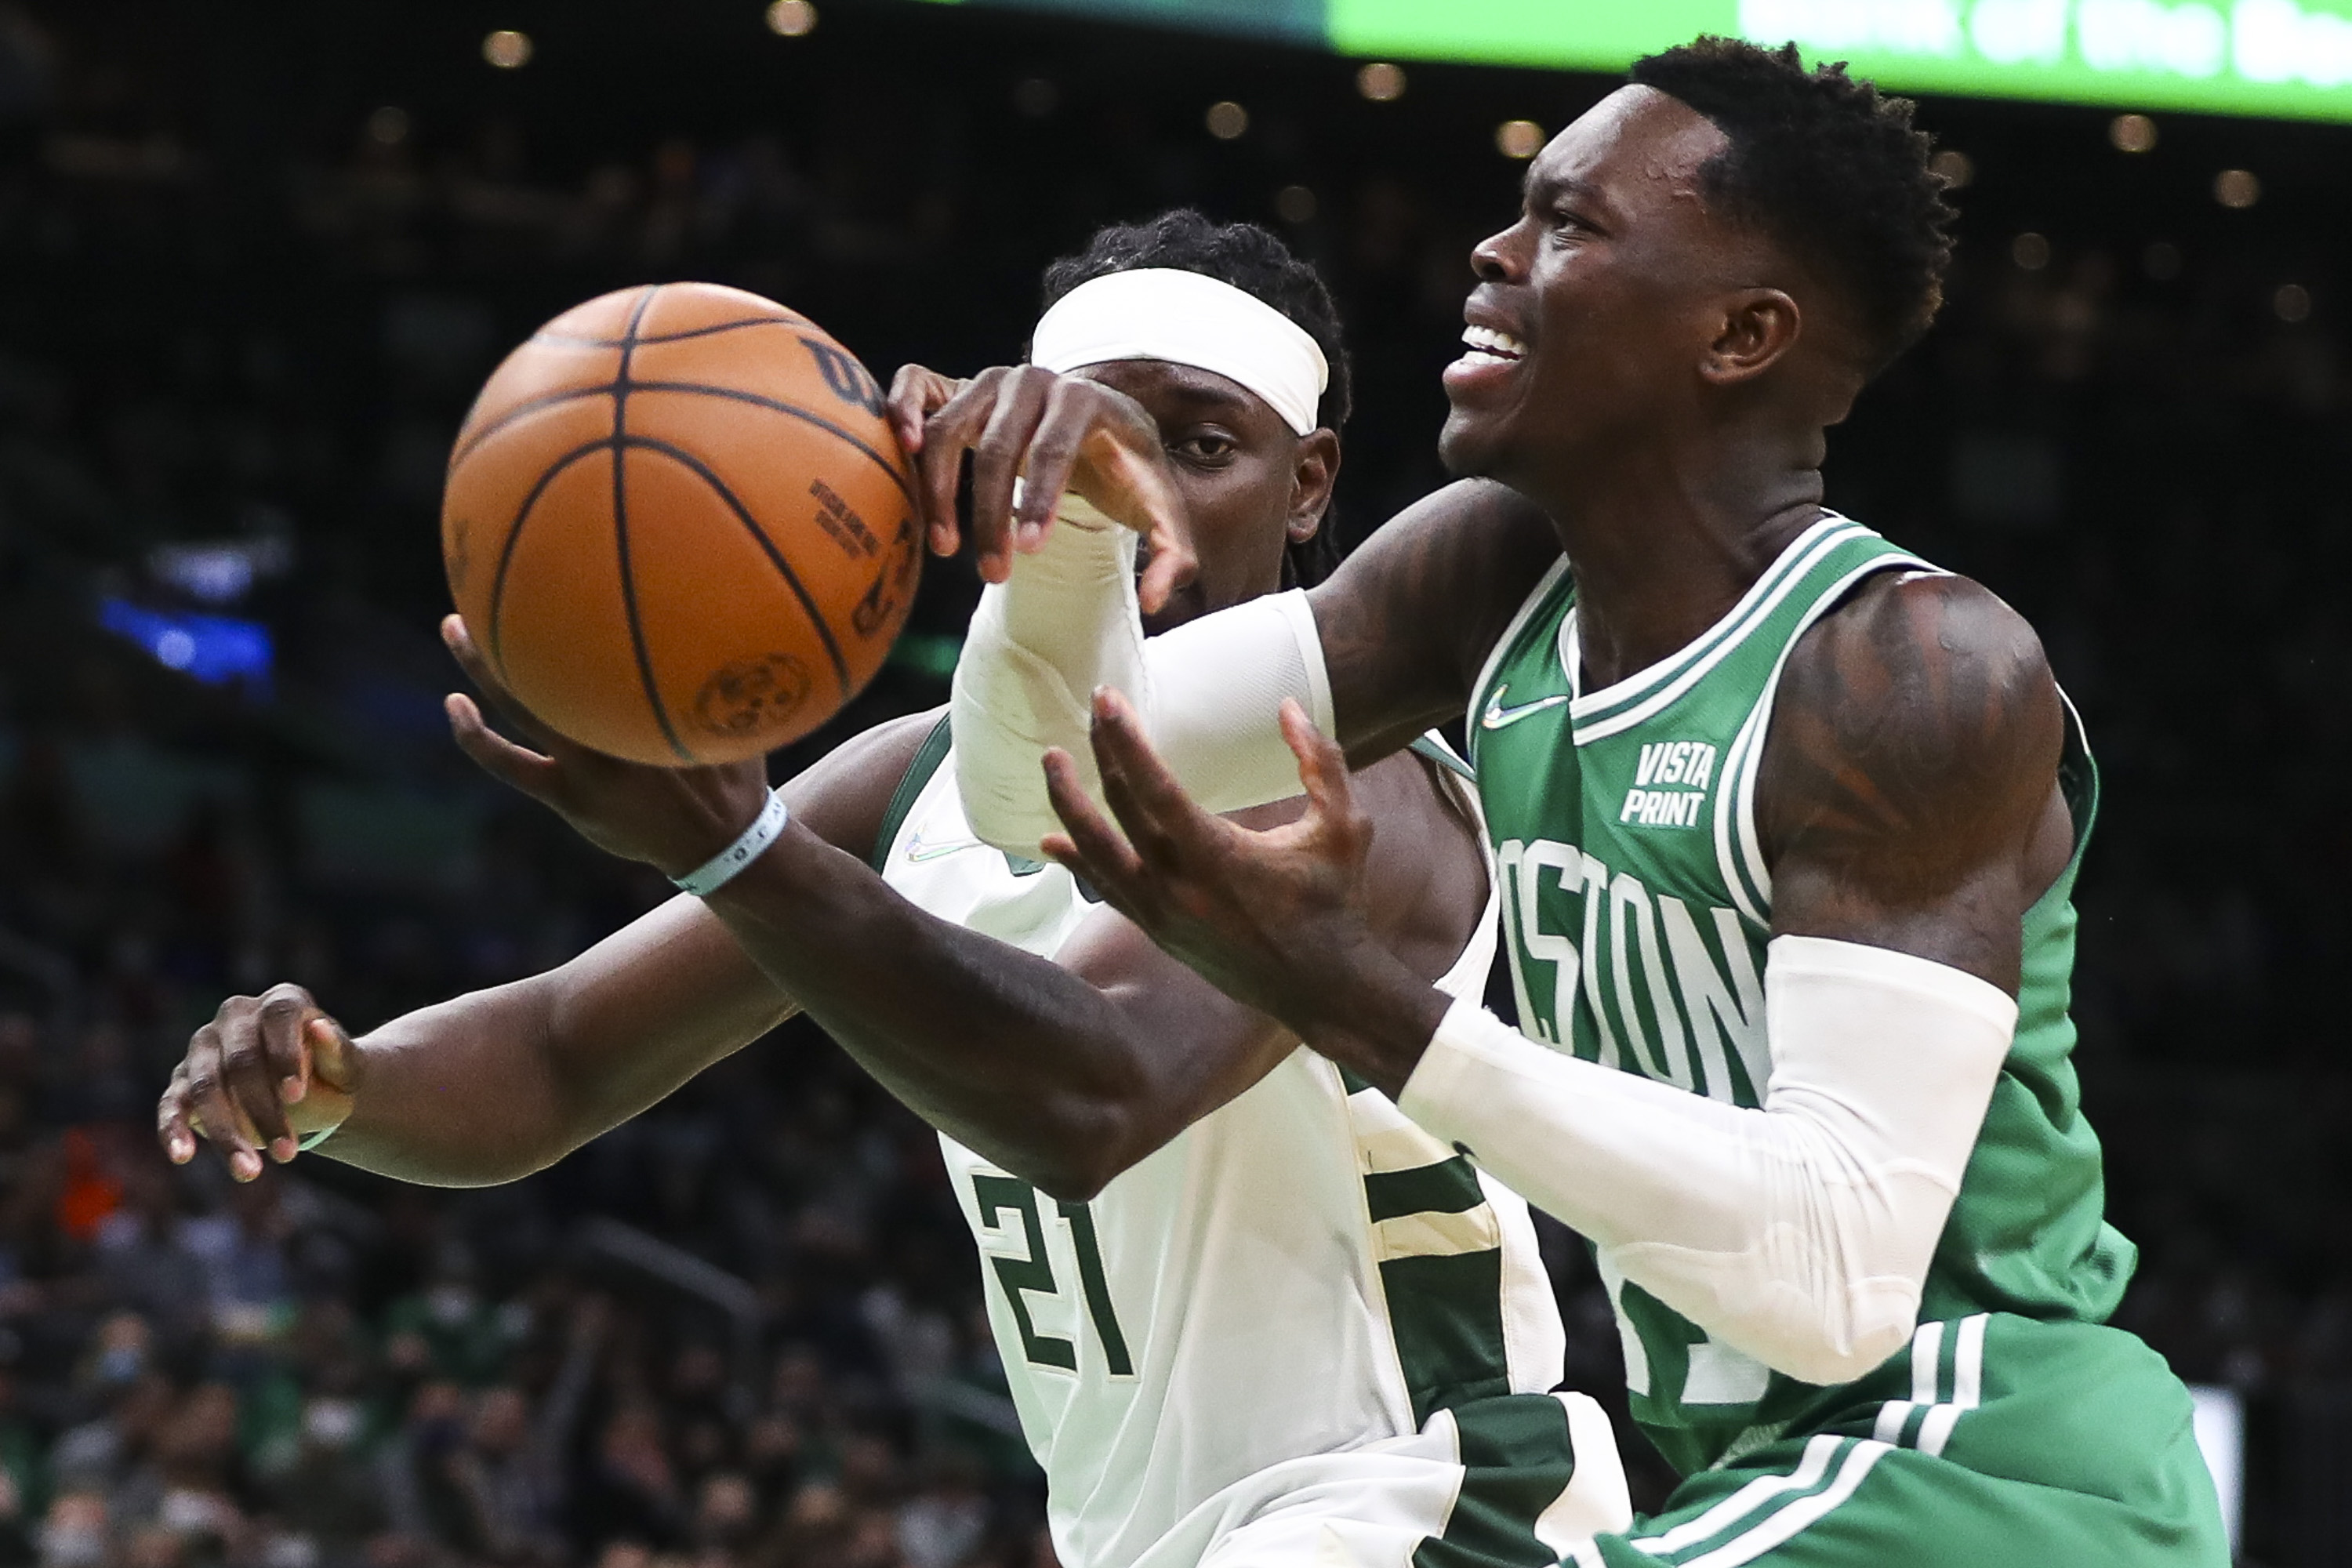 Boston Celtics point guard Dennis Schroder drives to the rim during a game against the Milwaukee Bucks